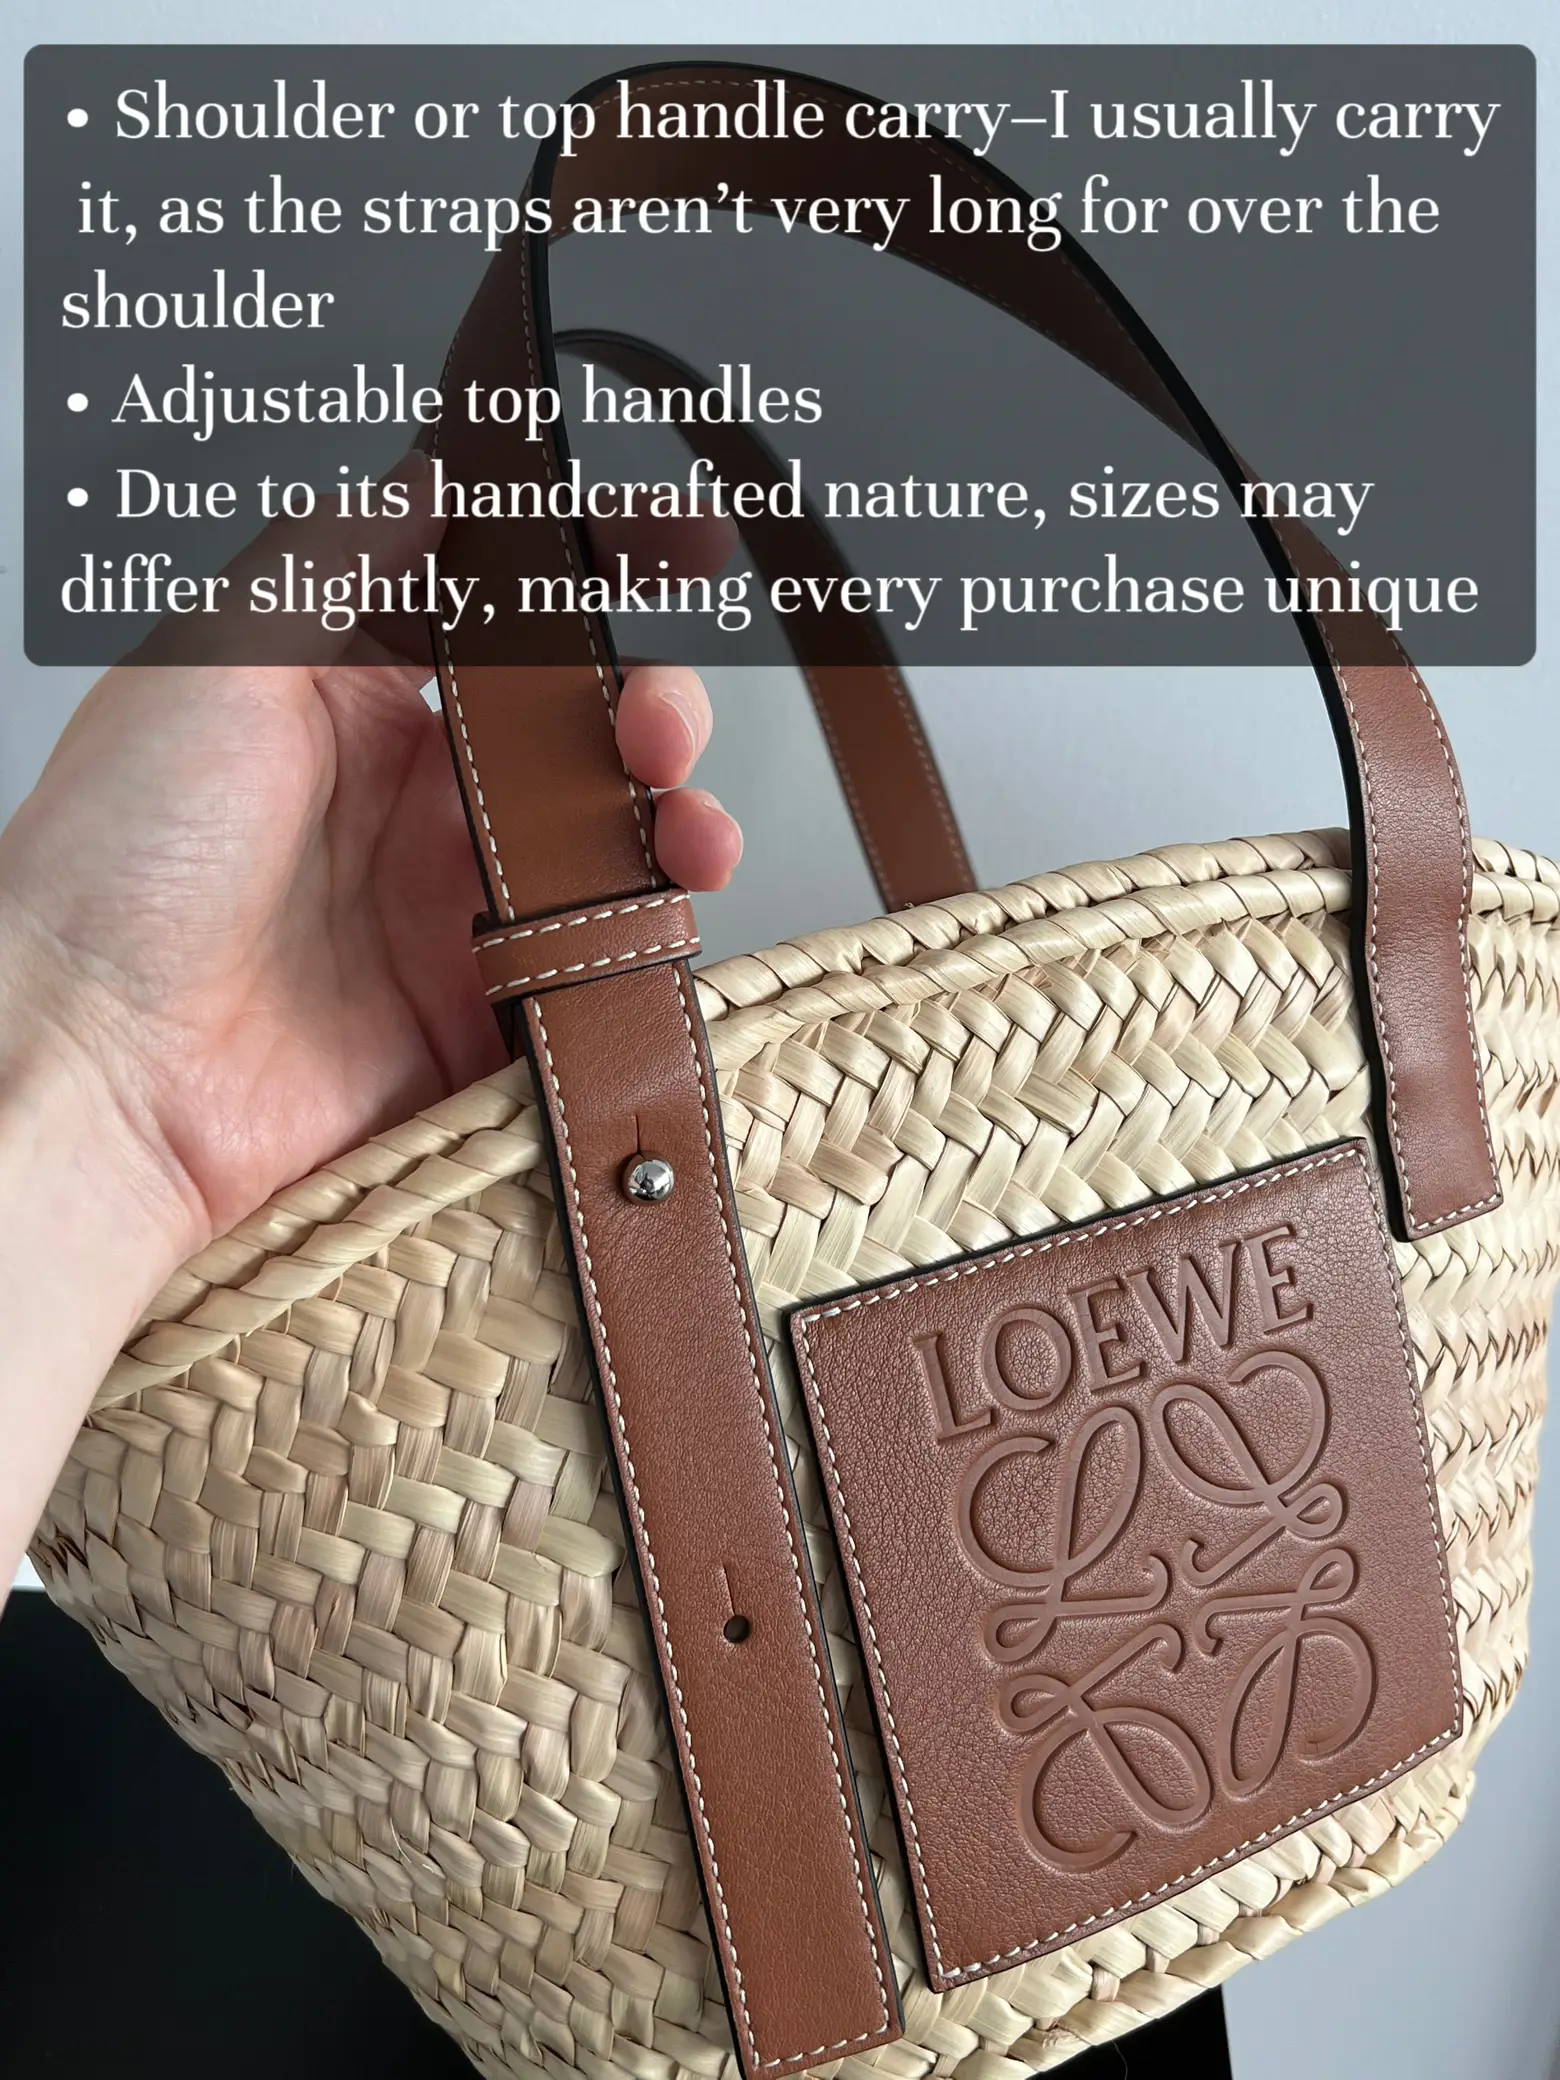 LOEWE RAFFIA BAG REVIEW - SIZE SMALL what fit's in this bag 